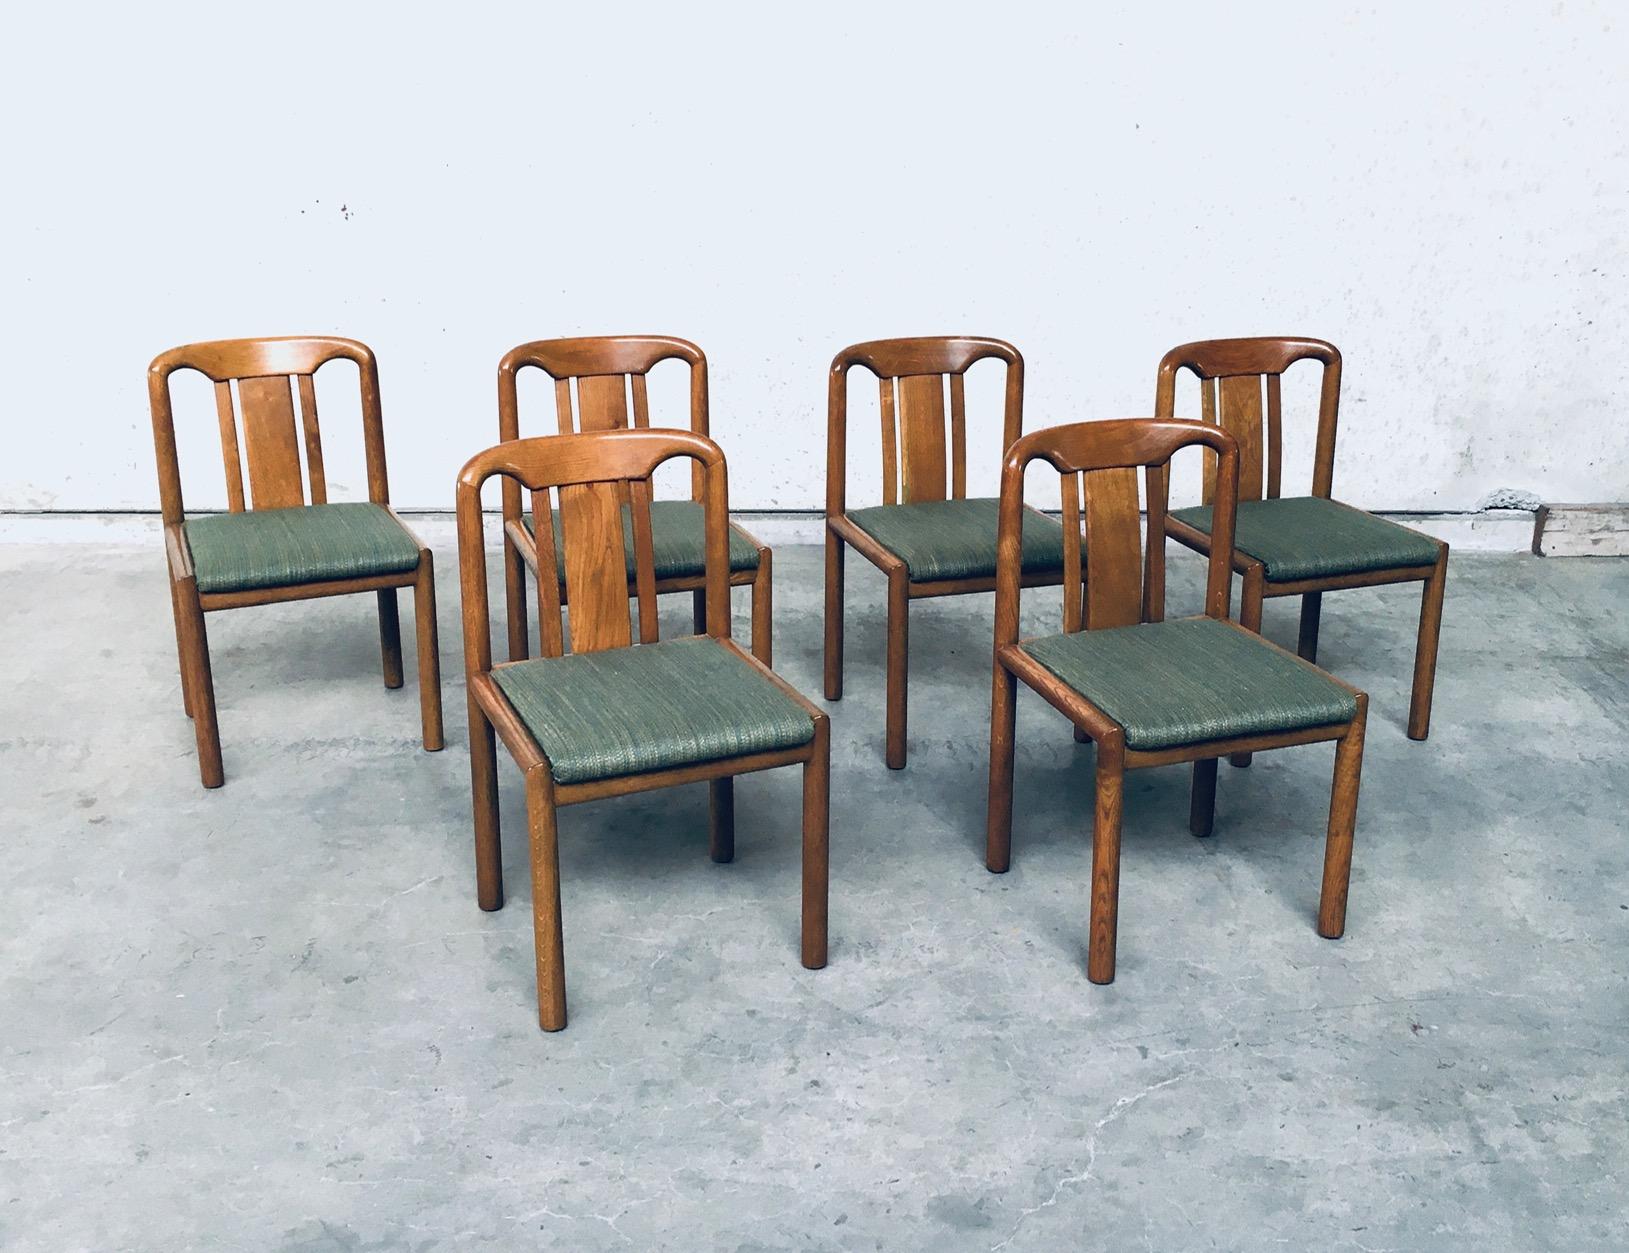 Vintage Mid-Century Modern German design set of 6 dining chairs in oak with green woven fabric seat. Made in Germany, in the 1970's. Well made sturdy design. Rounded oak frame with formed back. Labeled, but no maker name. All chairs come in very